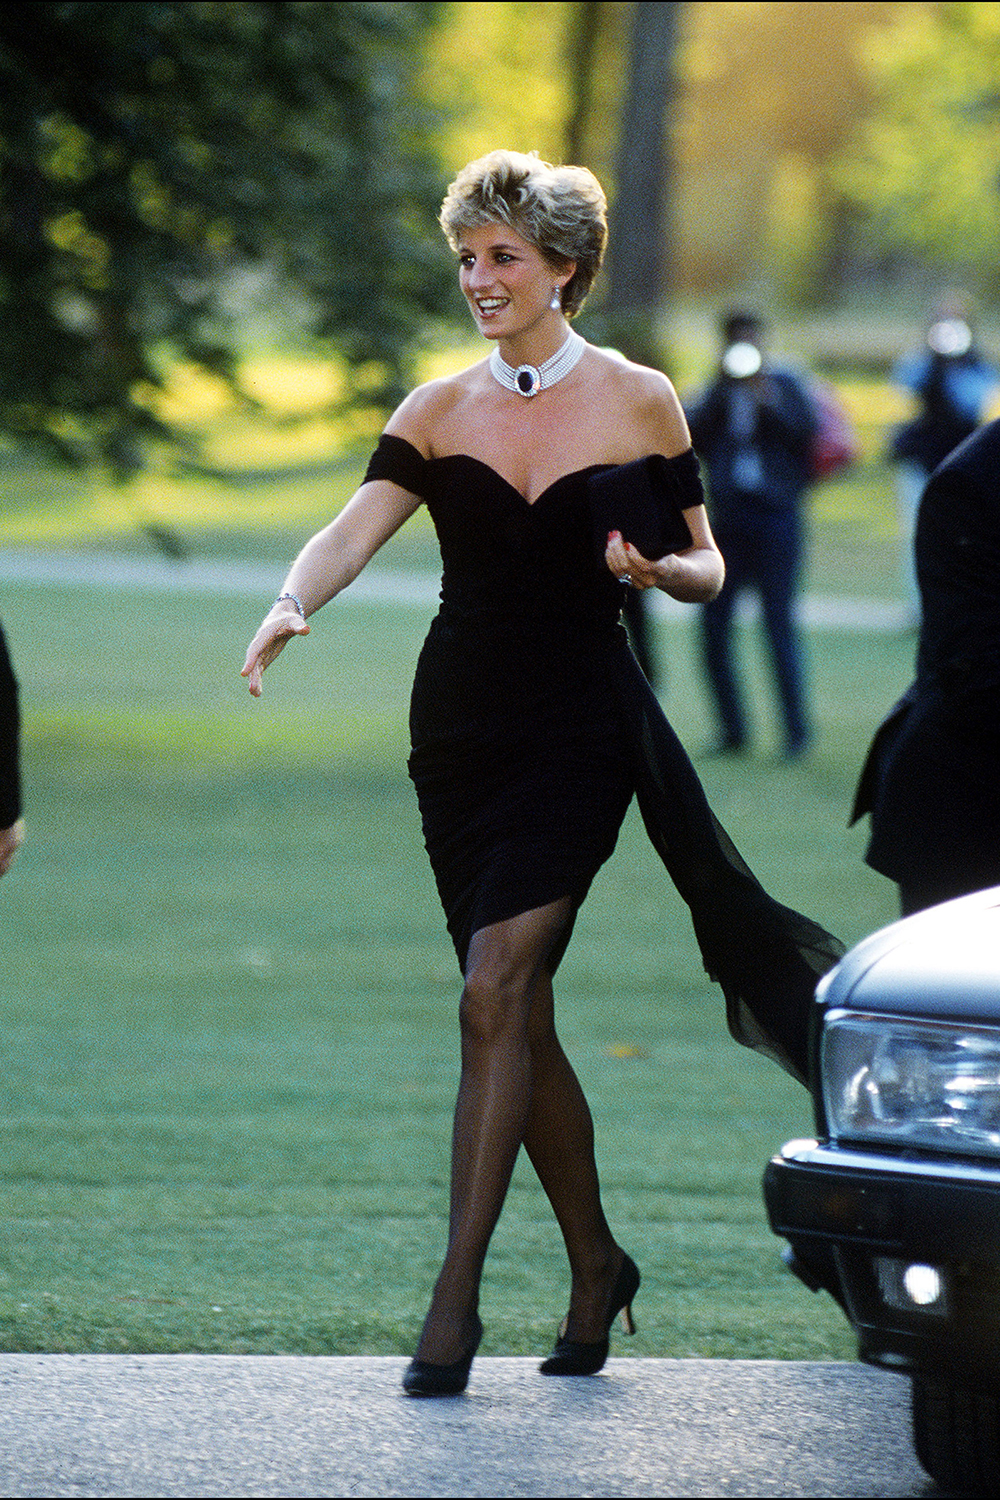 June, 1994 - Princess Diana arriving at the Serpentine Gallery wearing a Christina Stambolian gown in London.